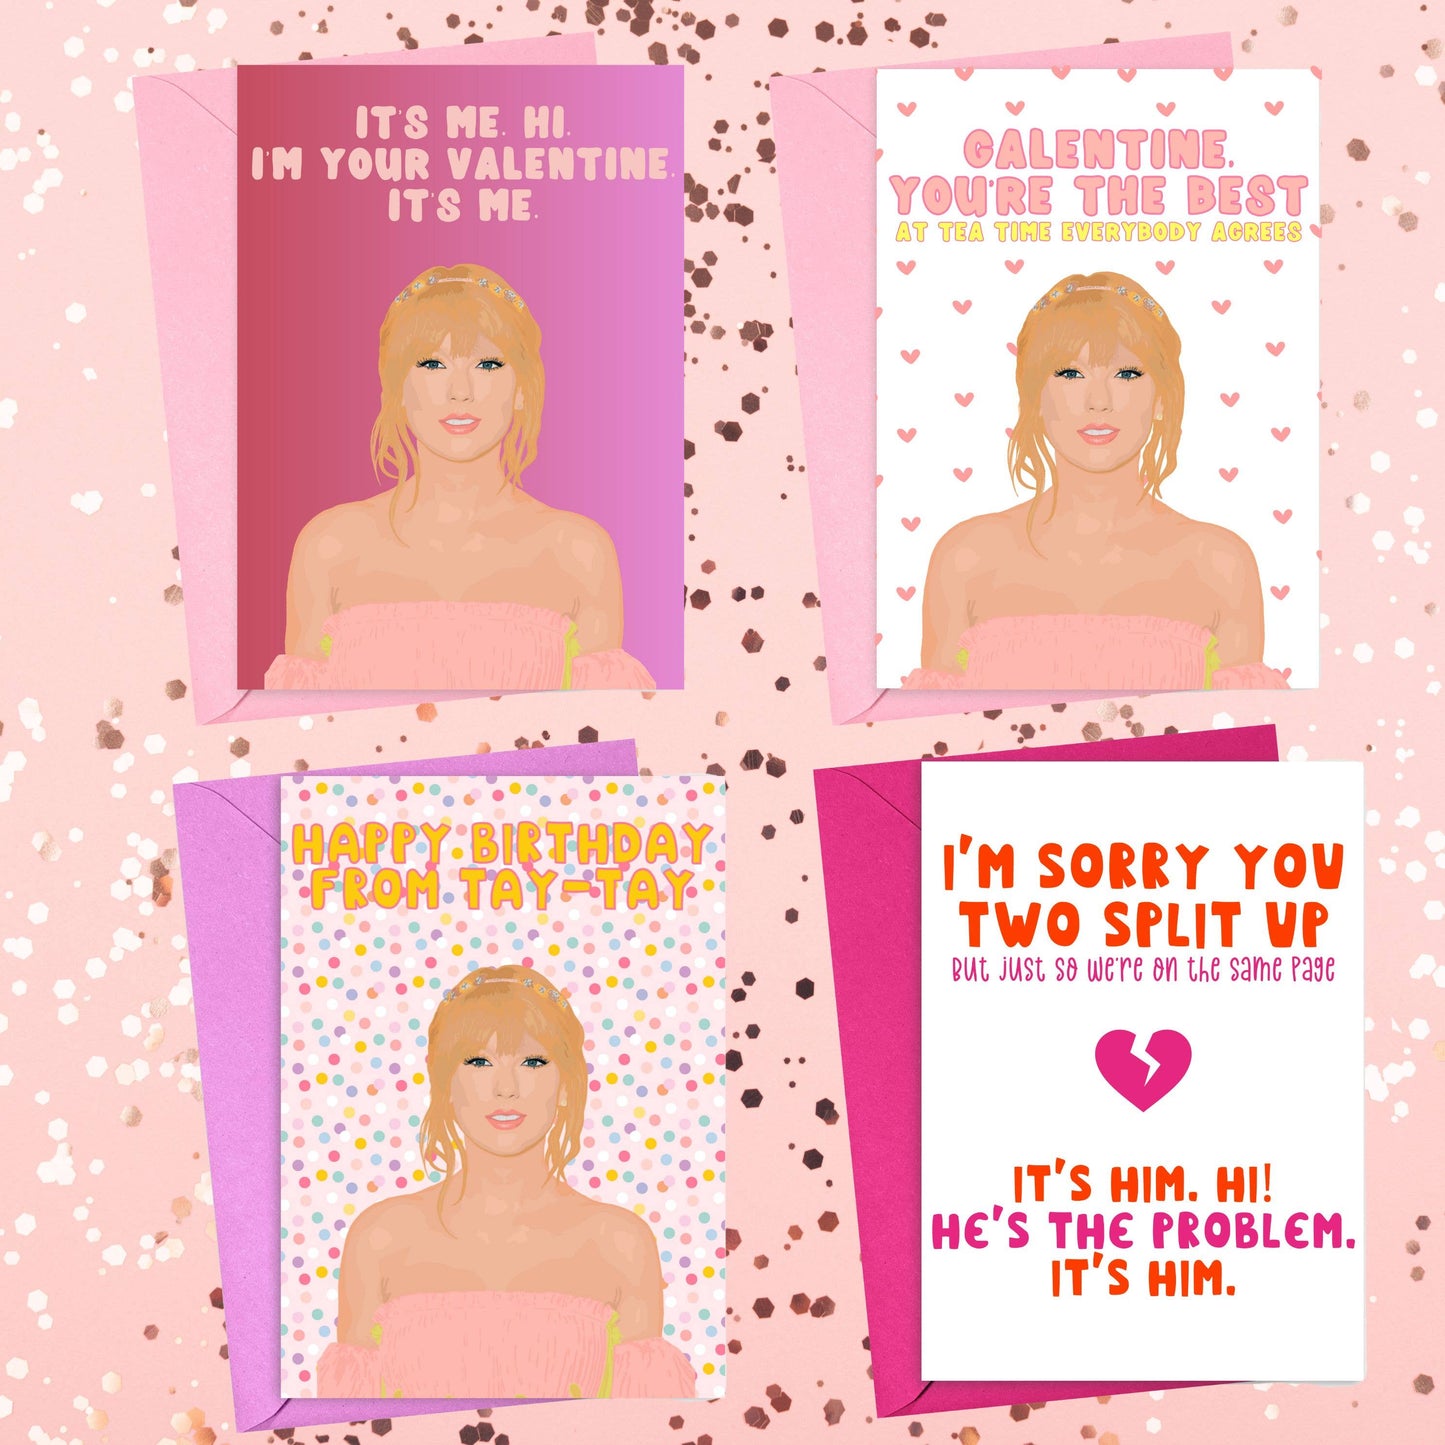 Taylor Swift Funny Christmas Card Pop Culture Holiday Cards